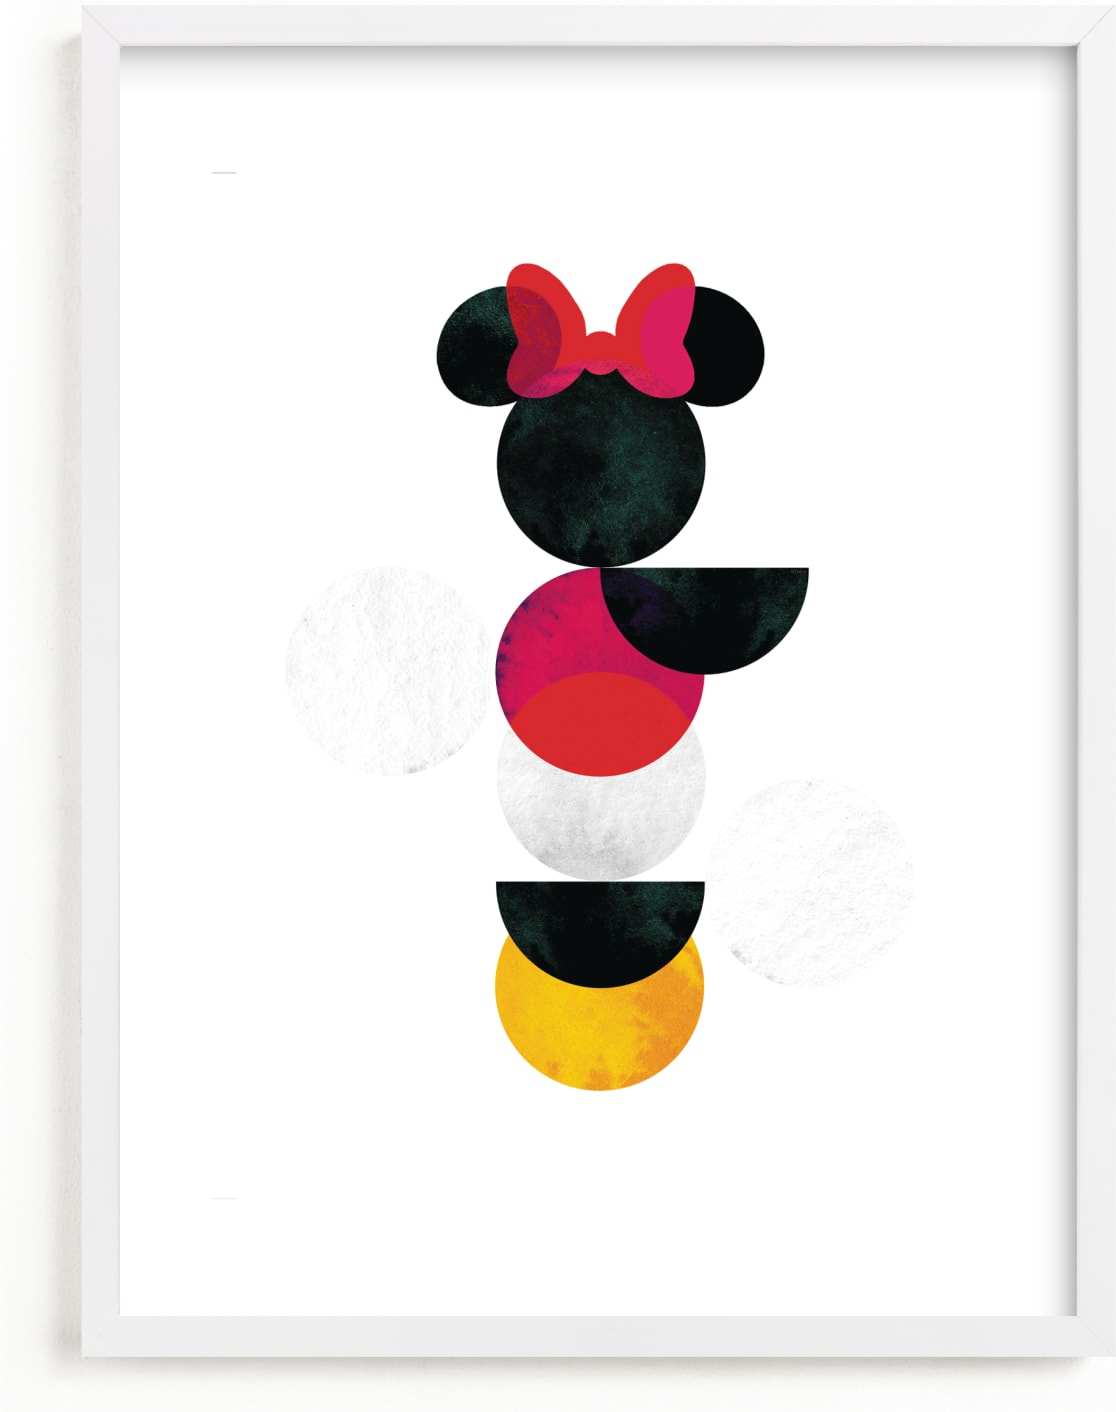 This is a yellow disney art by Anna Joseph called Disney Minimalist Minnie Mouse.